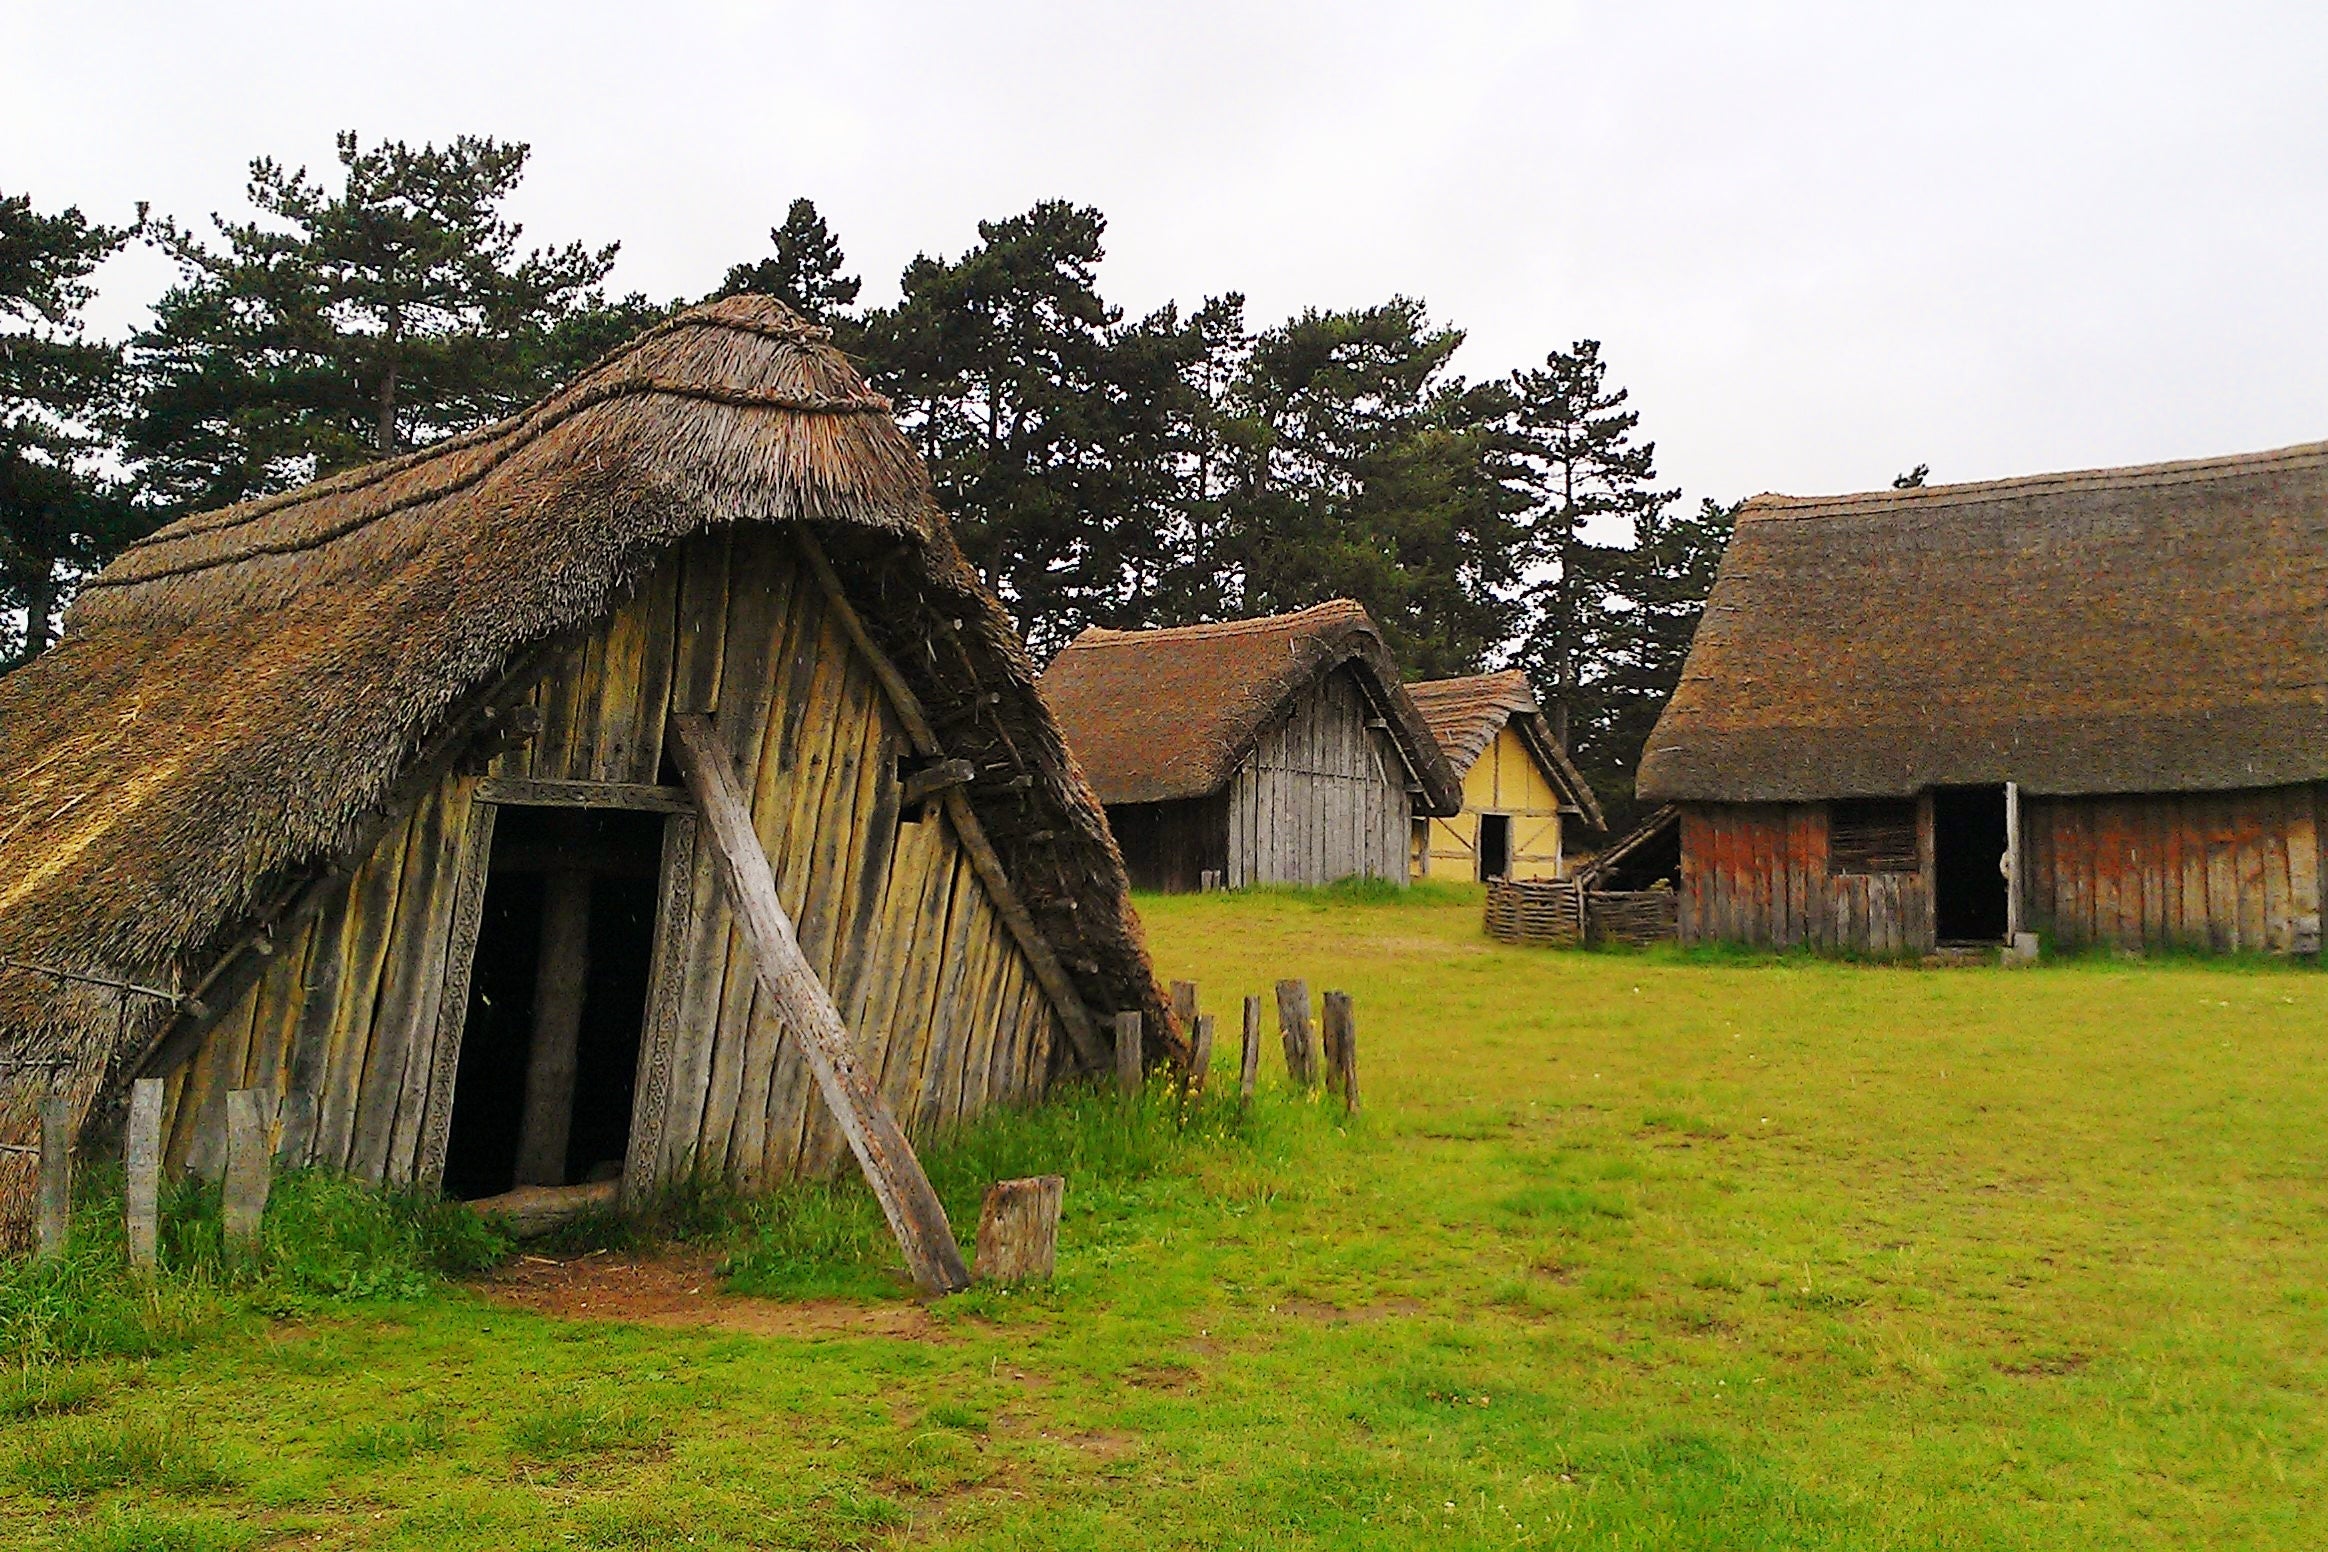 Four dumpy-looking thatched-roof buildings against a gray sky in a wet field.